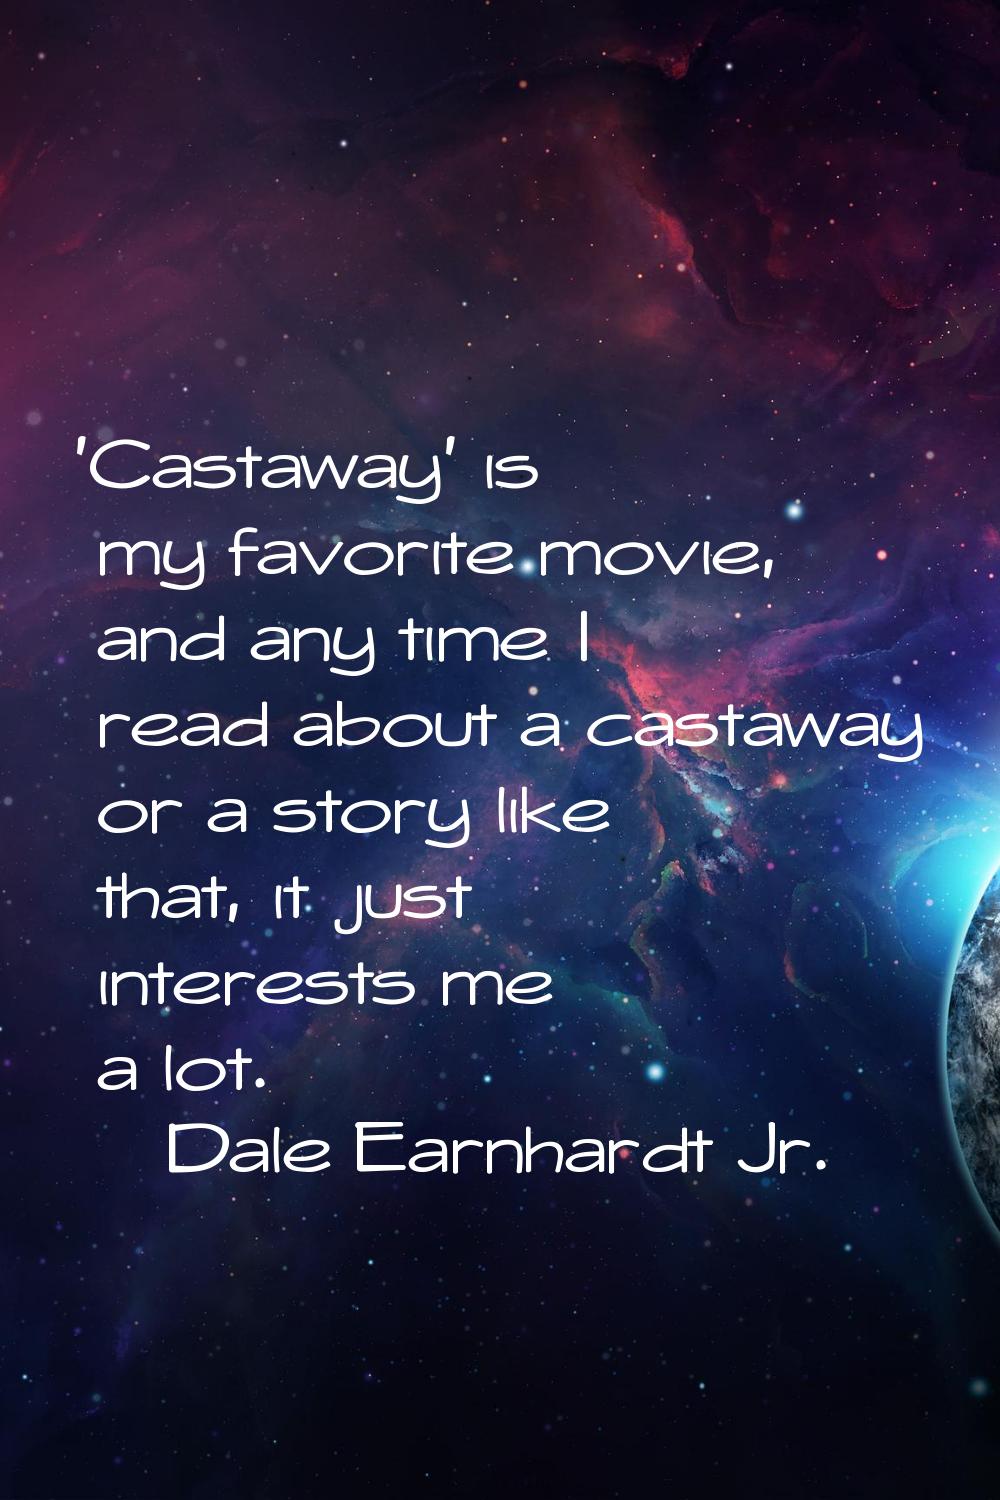 'Castaway' is my favorite movie, and any time I read about a castaway or a story like that, it just